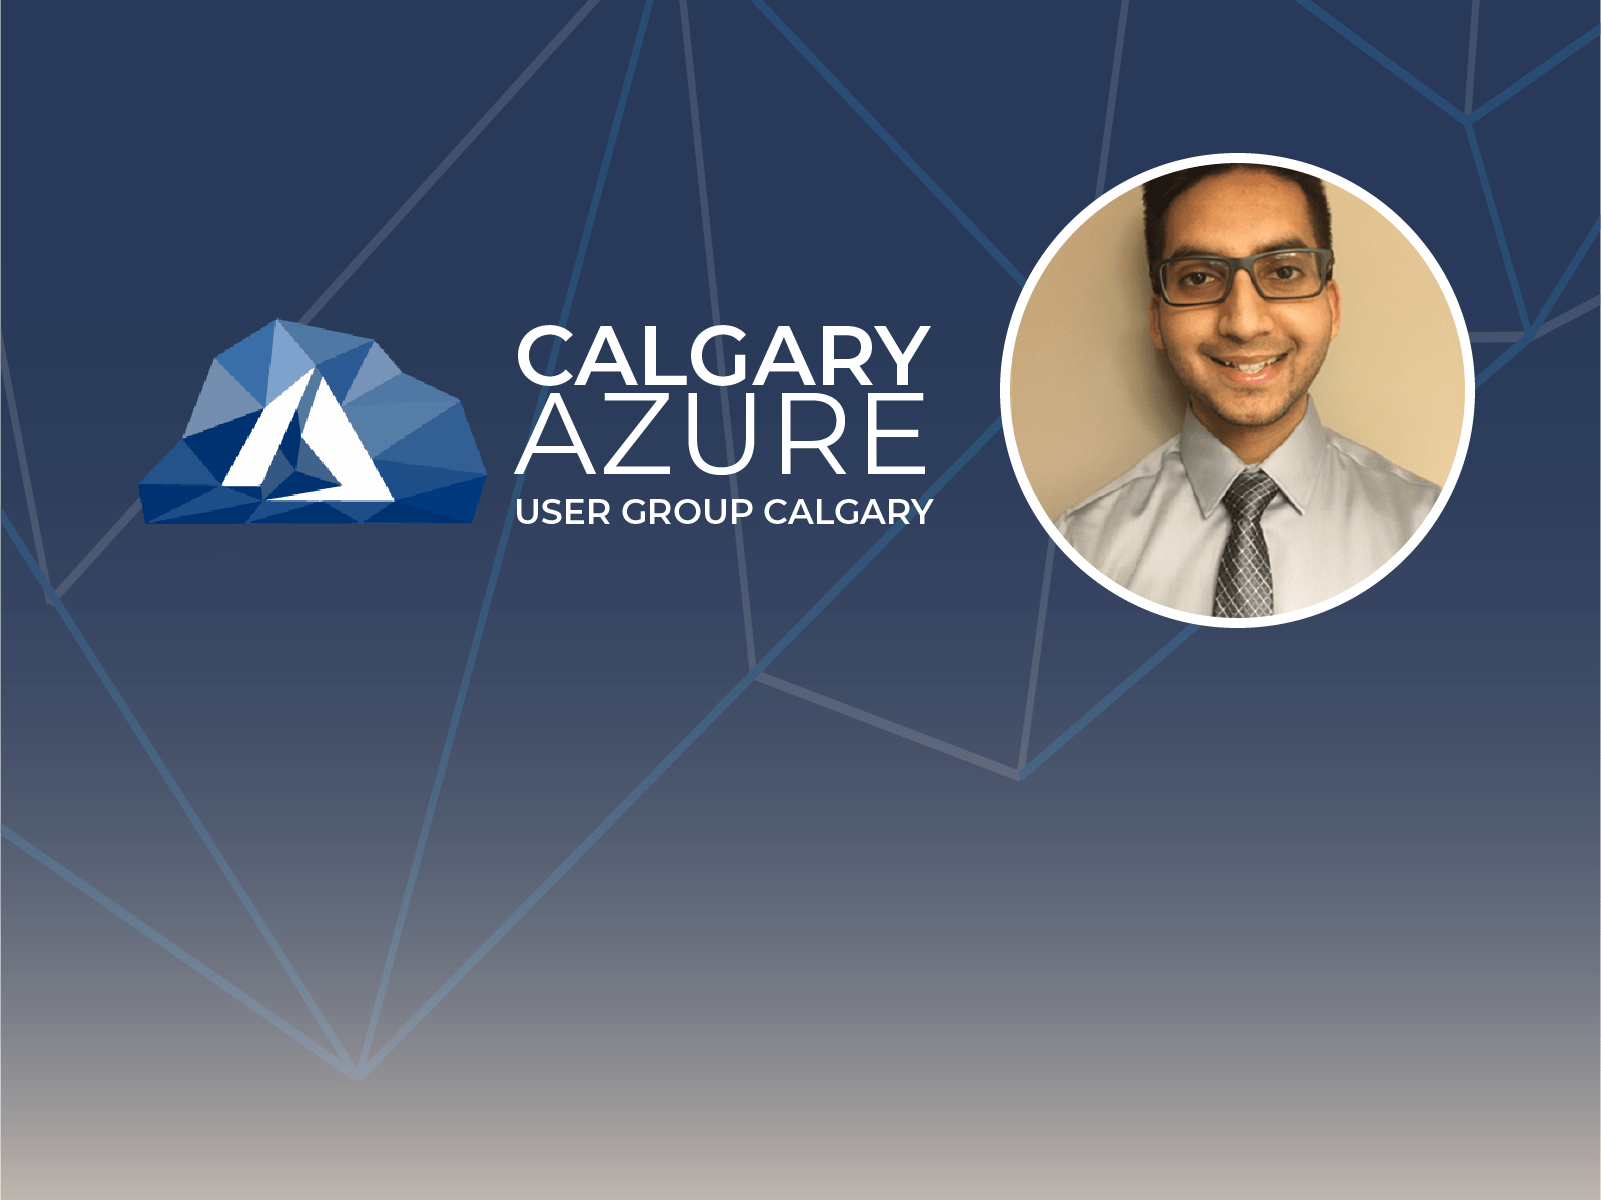 Getting Started with Azure Machine Learning with Pratheek Deveraj